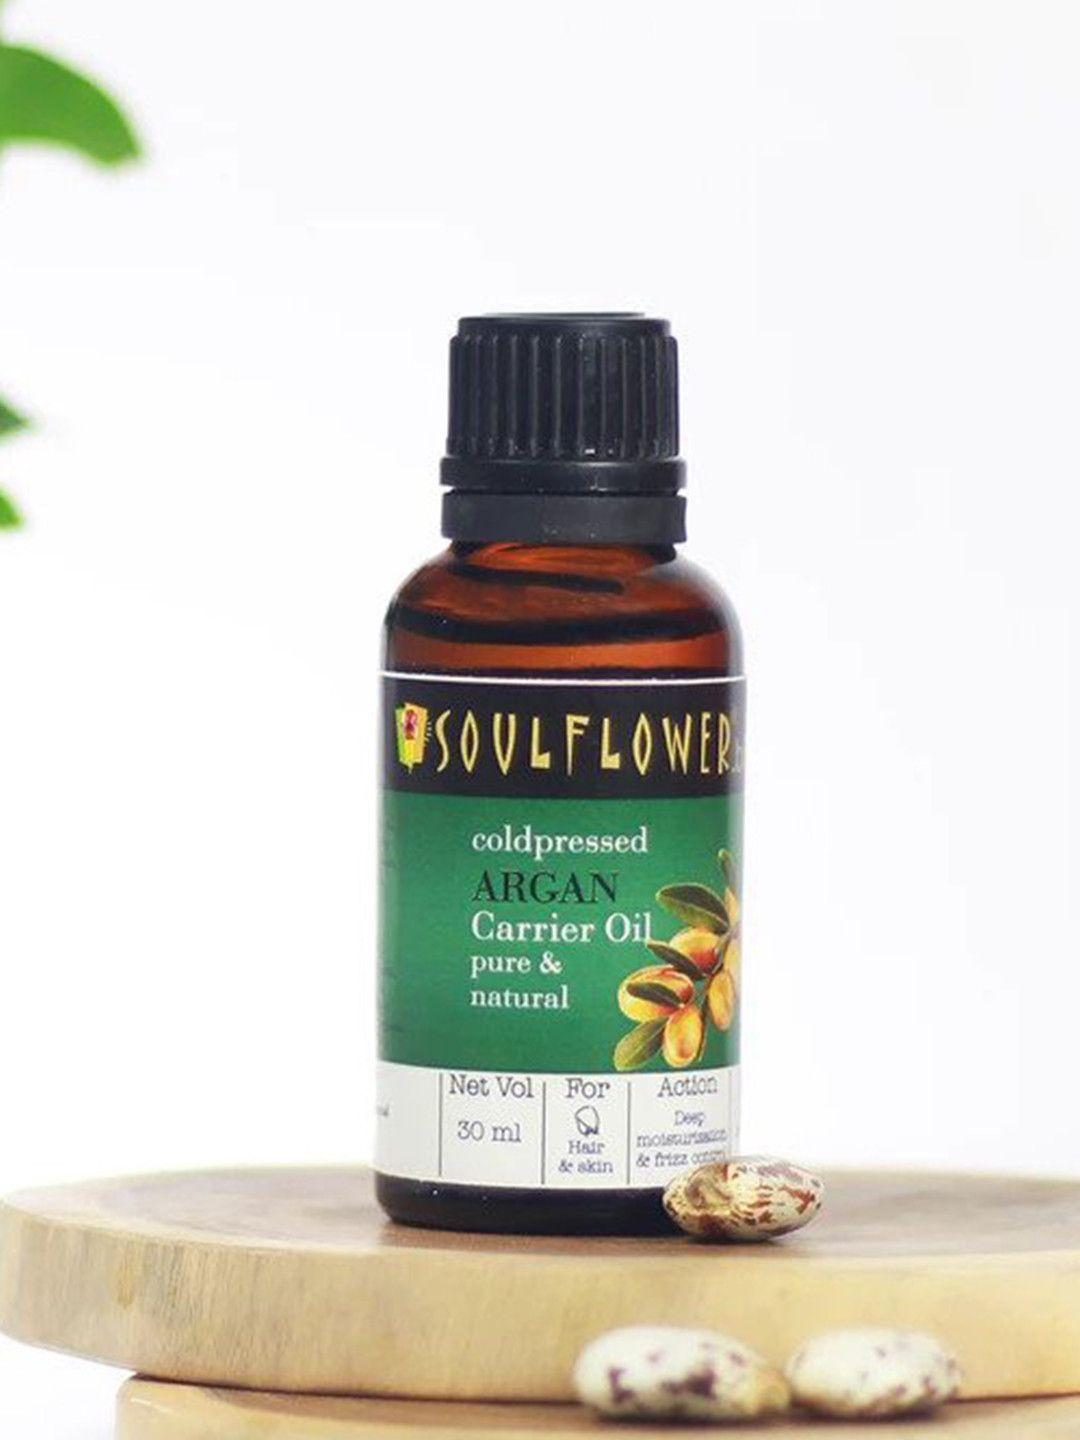 soulflower natural cold pressed argan oil for skin, hair & nails to moisturize - 30 ml